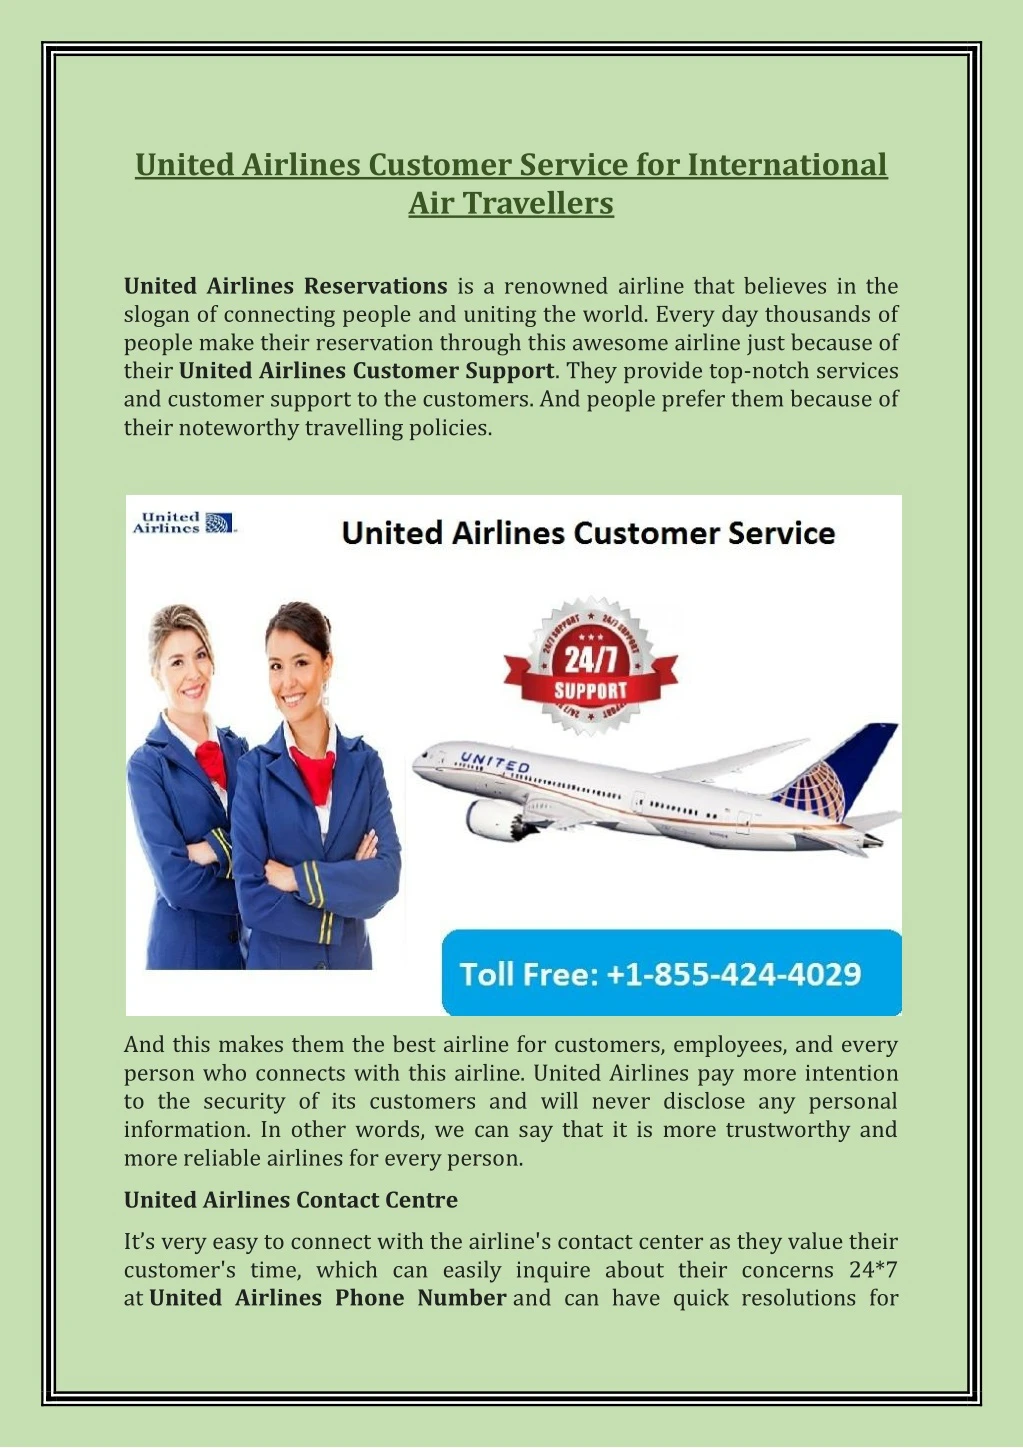 PPT - Get United Airlines Customer Service for International Air ...